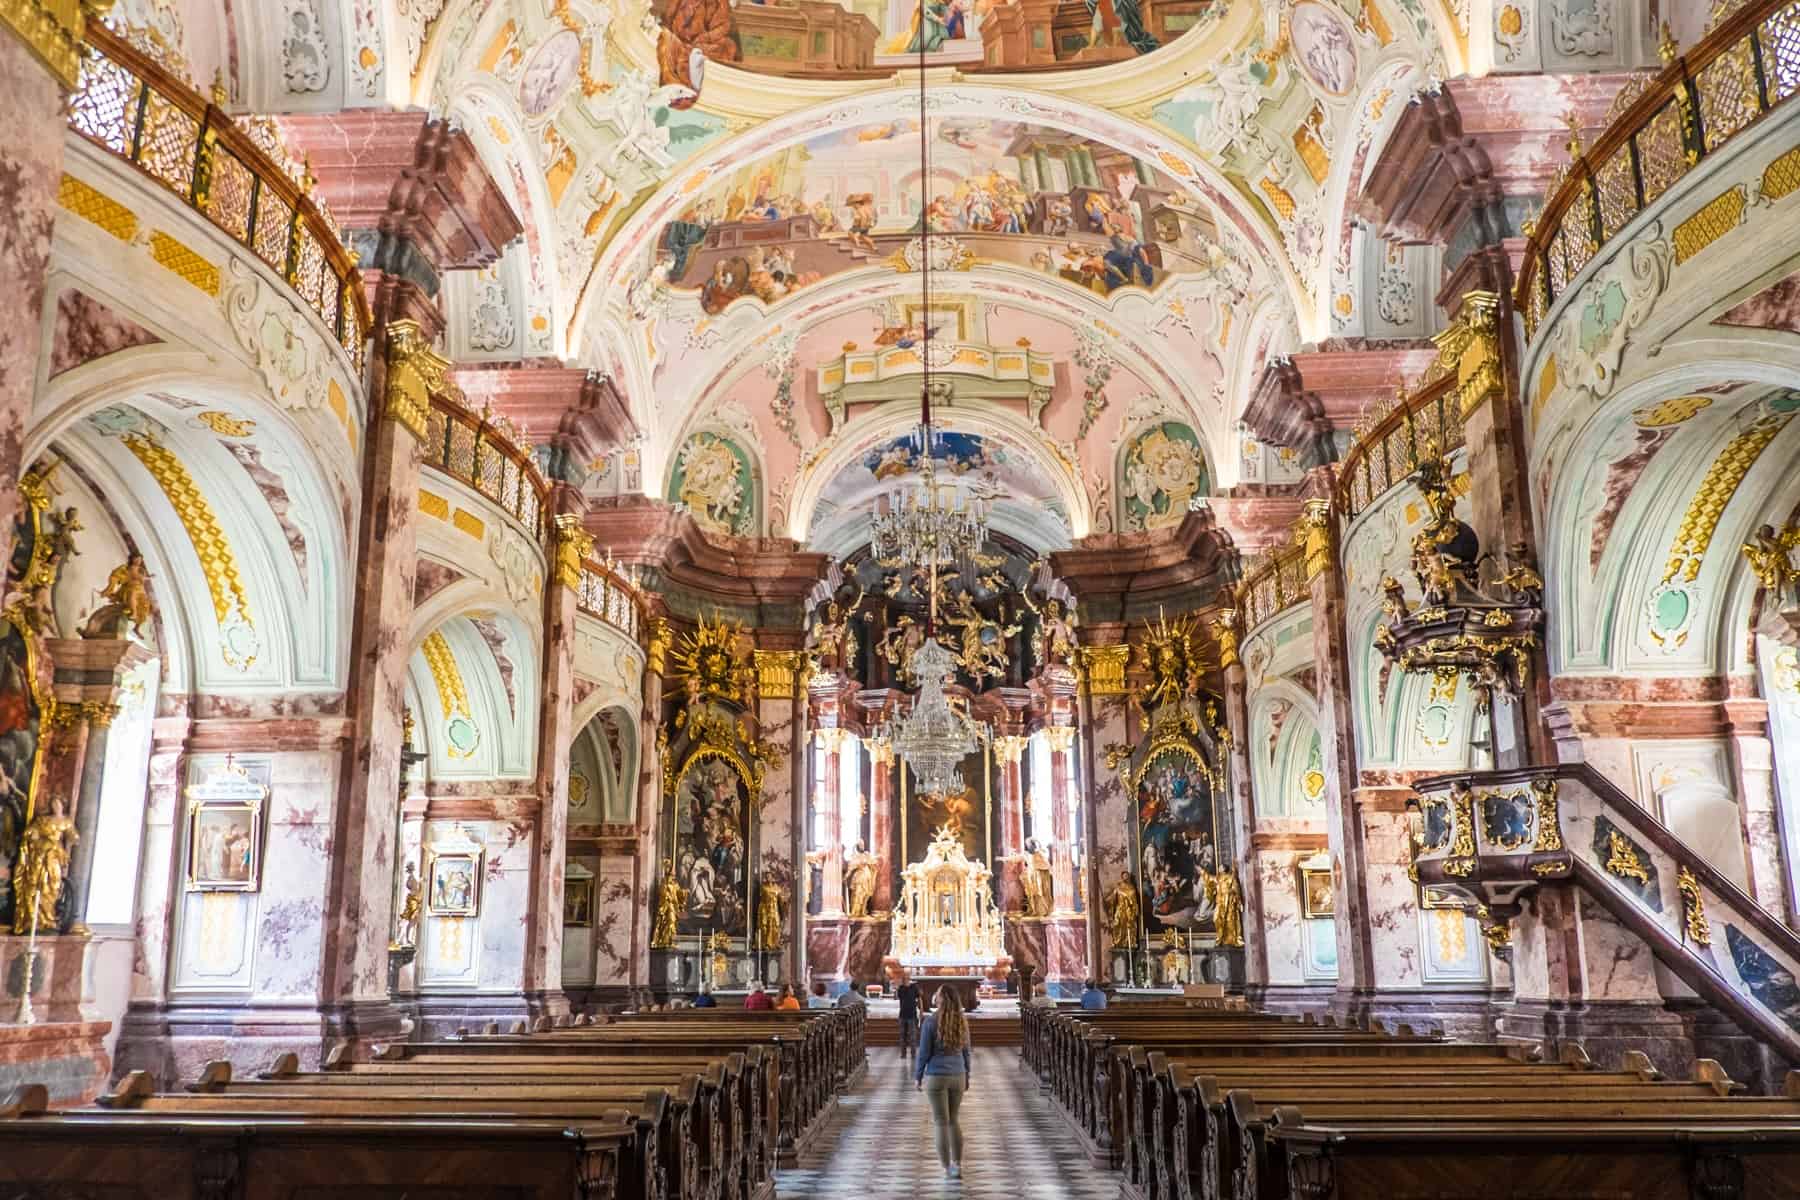 The baroque gold, brown and pastel painting decorated interior of the basilica at Stift Rein Abbey in Styria Austria